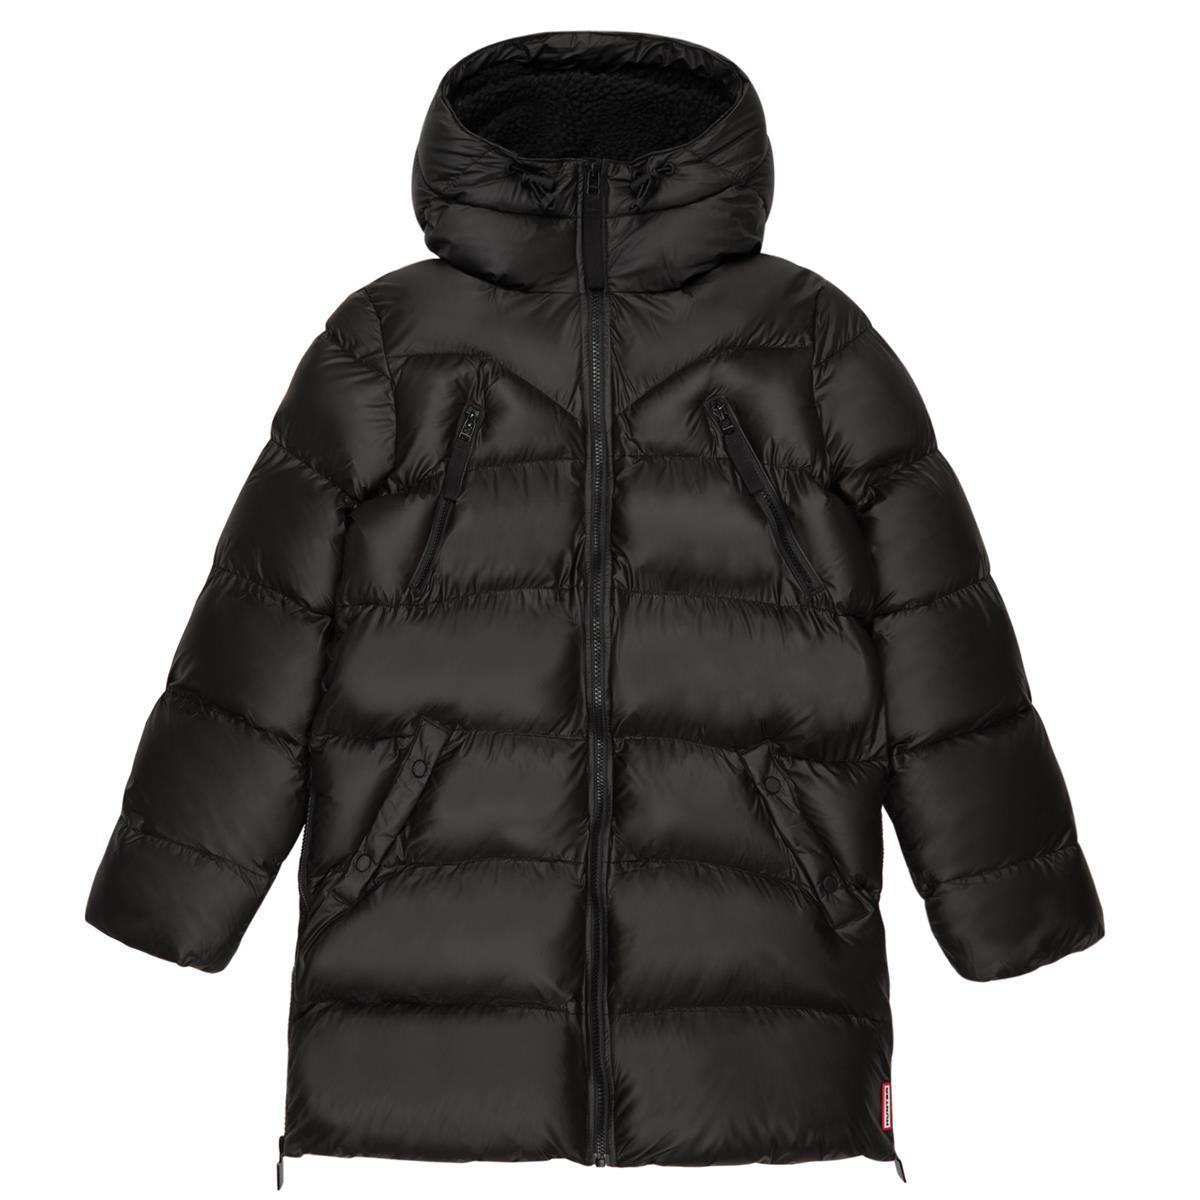 What are the extra attributes of the Hunter Puffer Jacket?